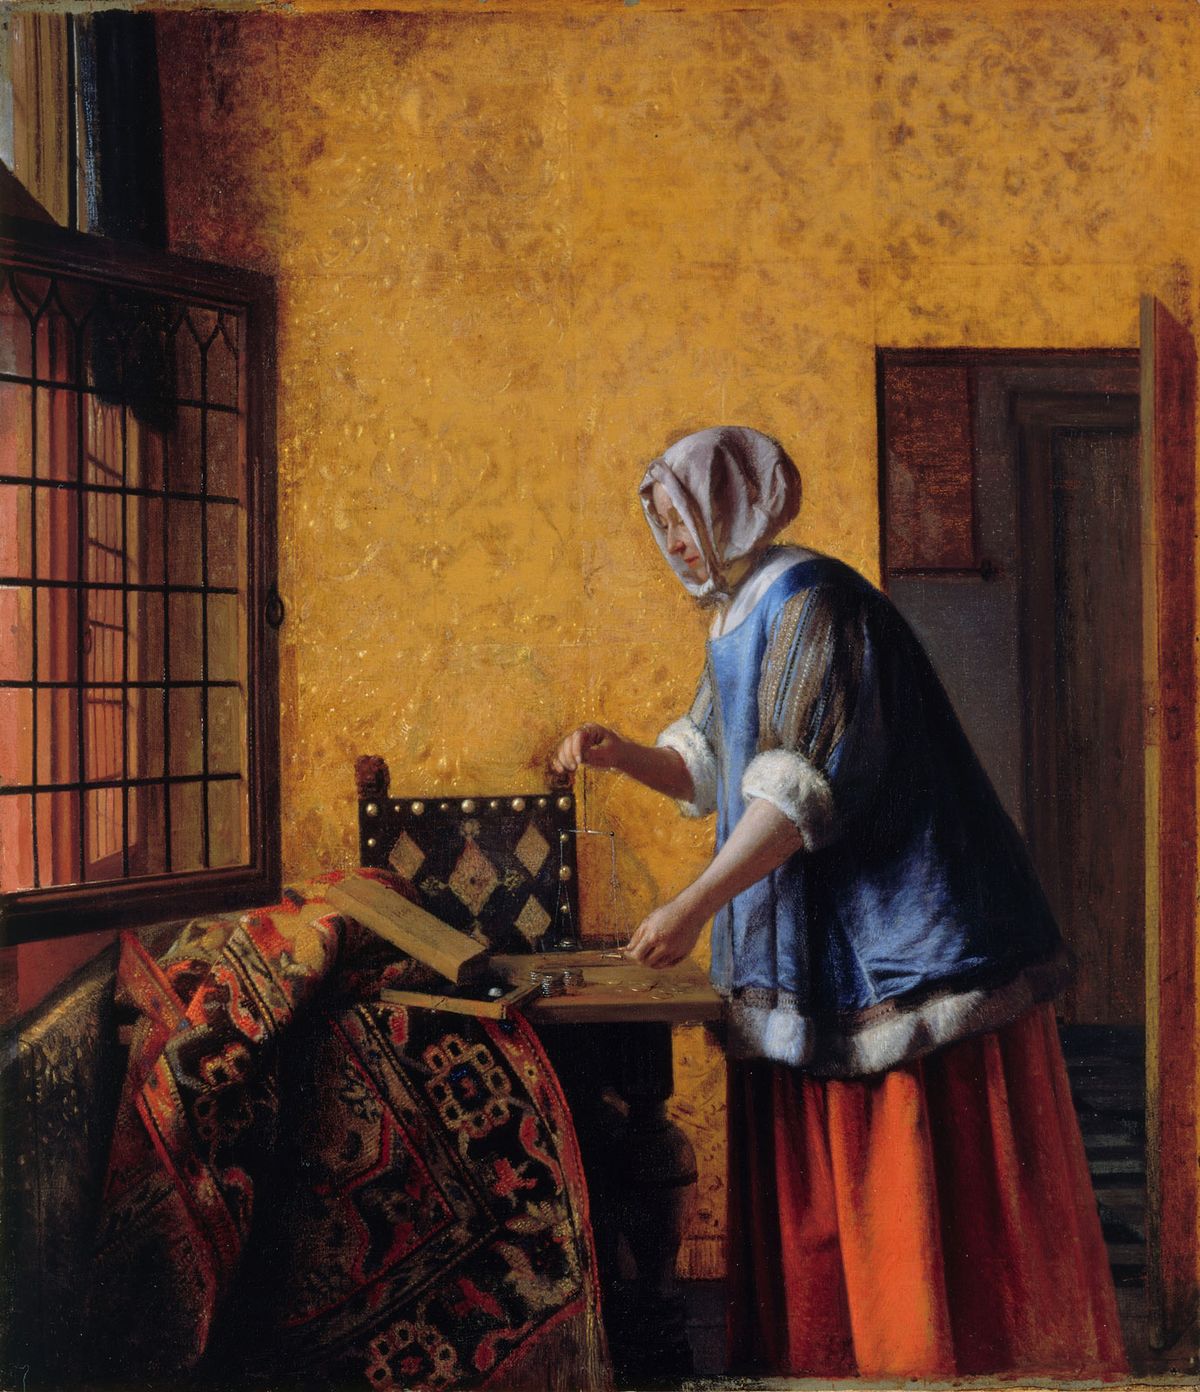 Pieter de Hooch's signature is thought to have been discovered in the painting Woman weighing gold and silver Coins (around 1664) Gemäldegalerie Staatliche Museen zu Berlin